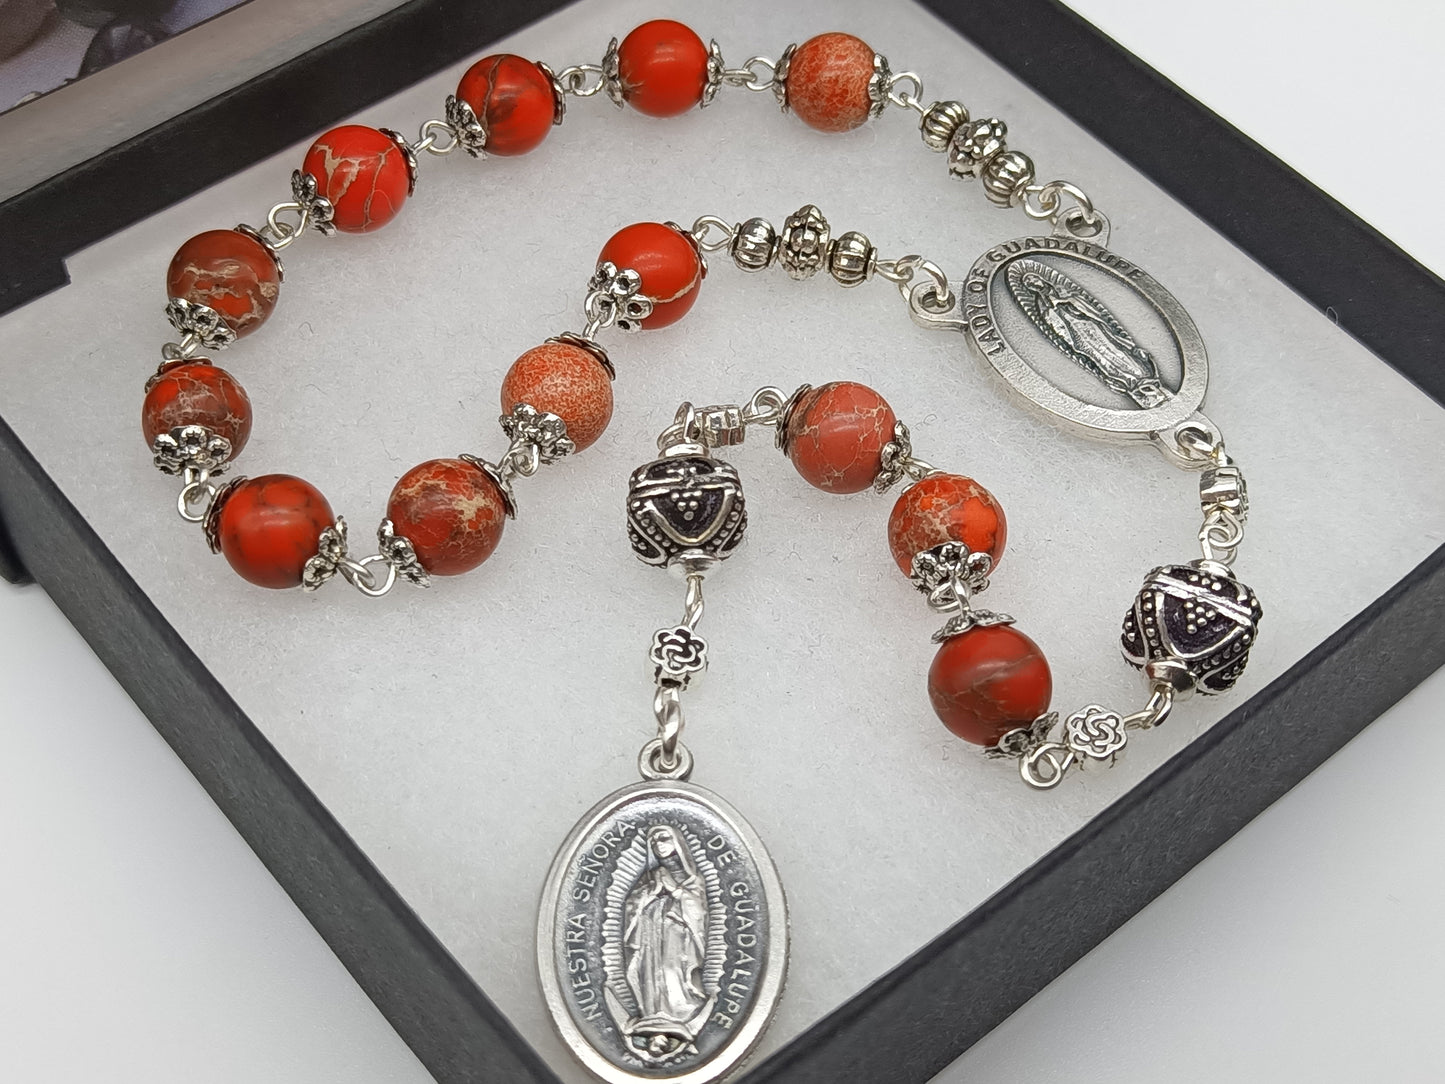 Our Lady of Guadalupe RELIC gemstone single decade rosary, Men's tenner rosary beads, RELIC Pocket Rosary beads.